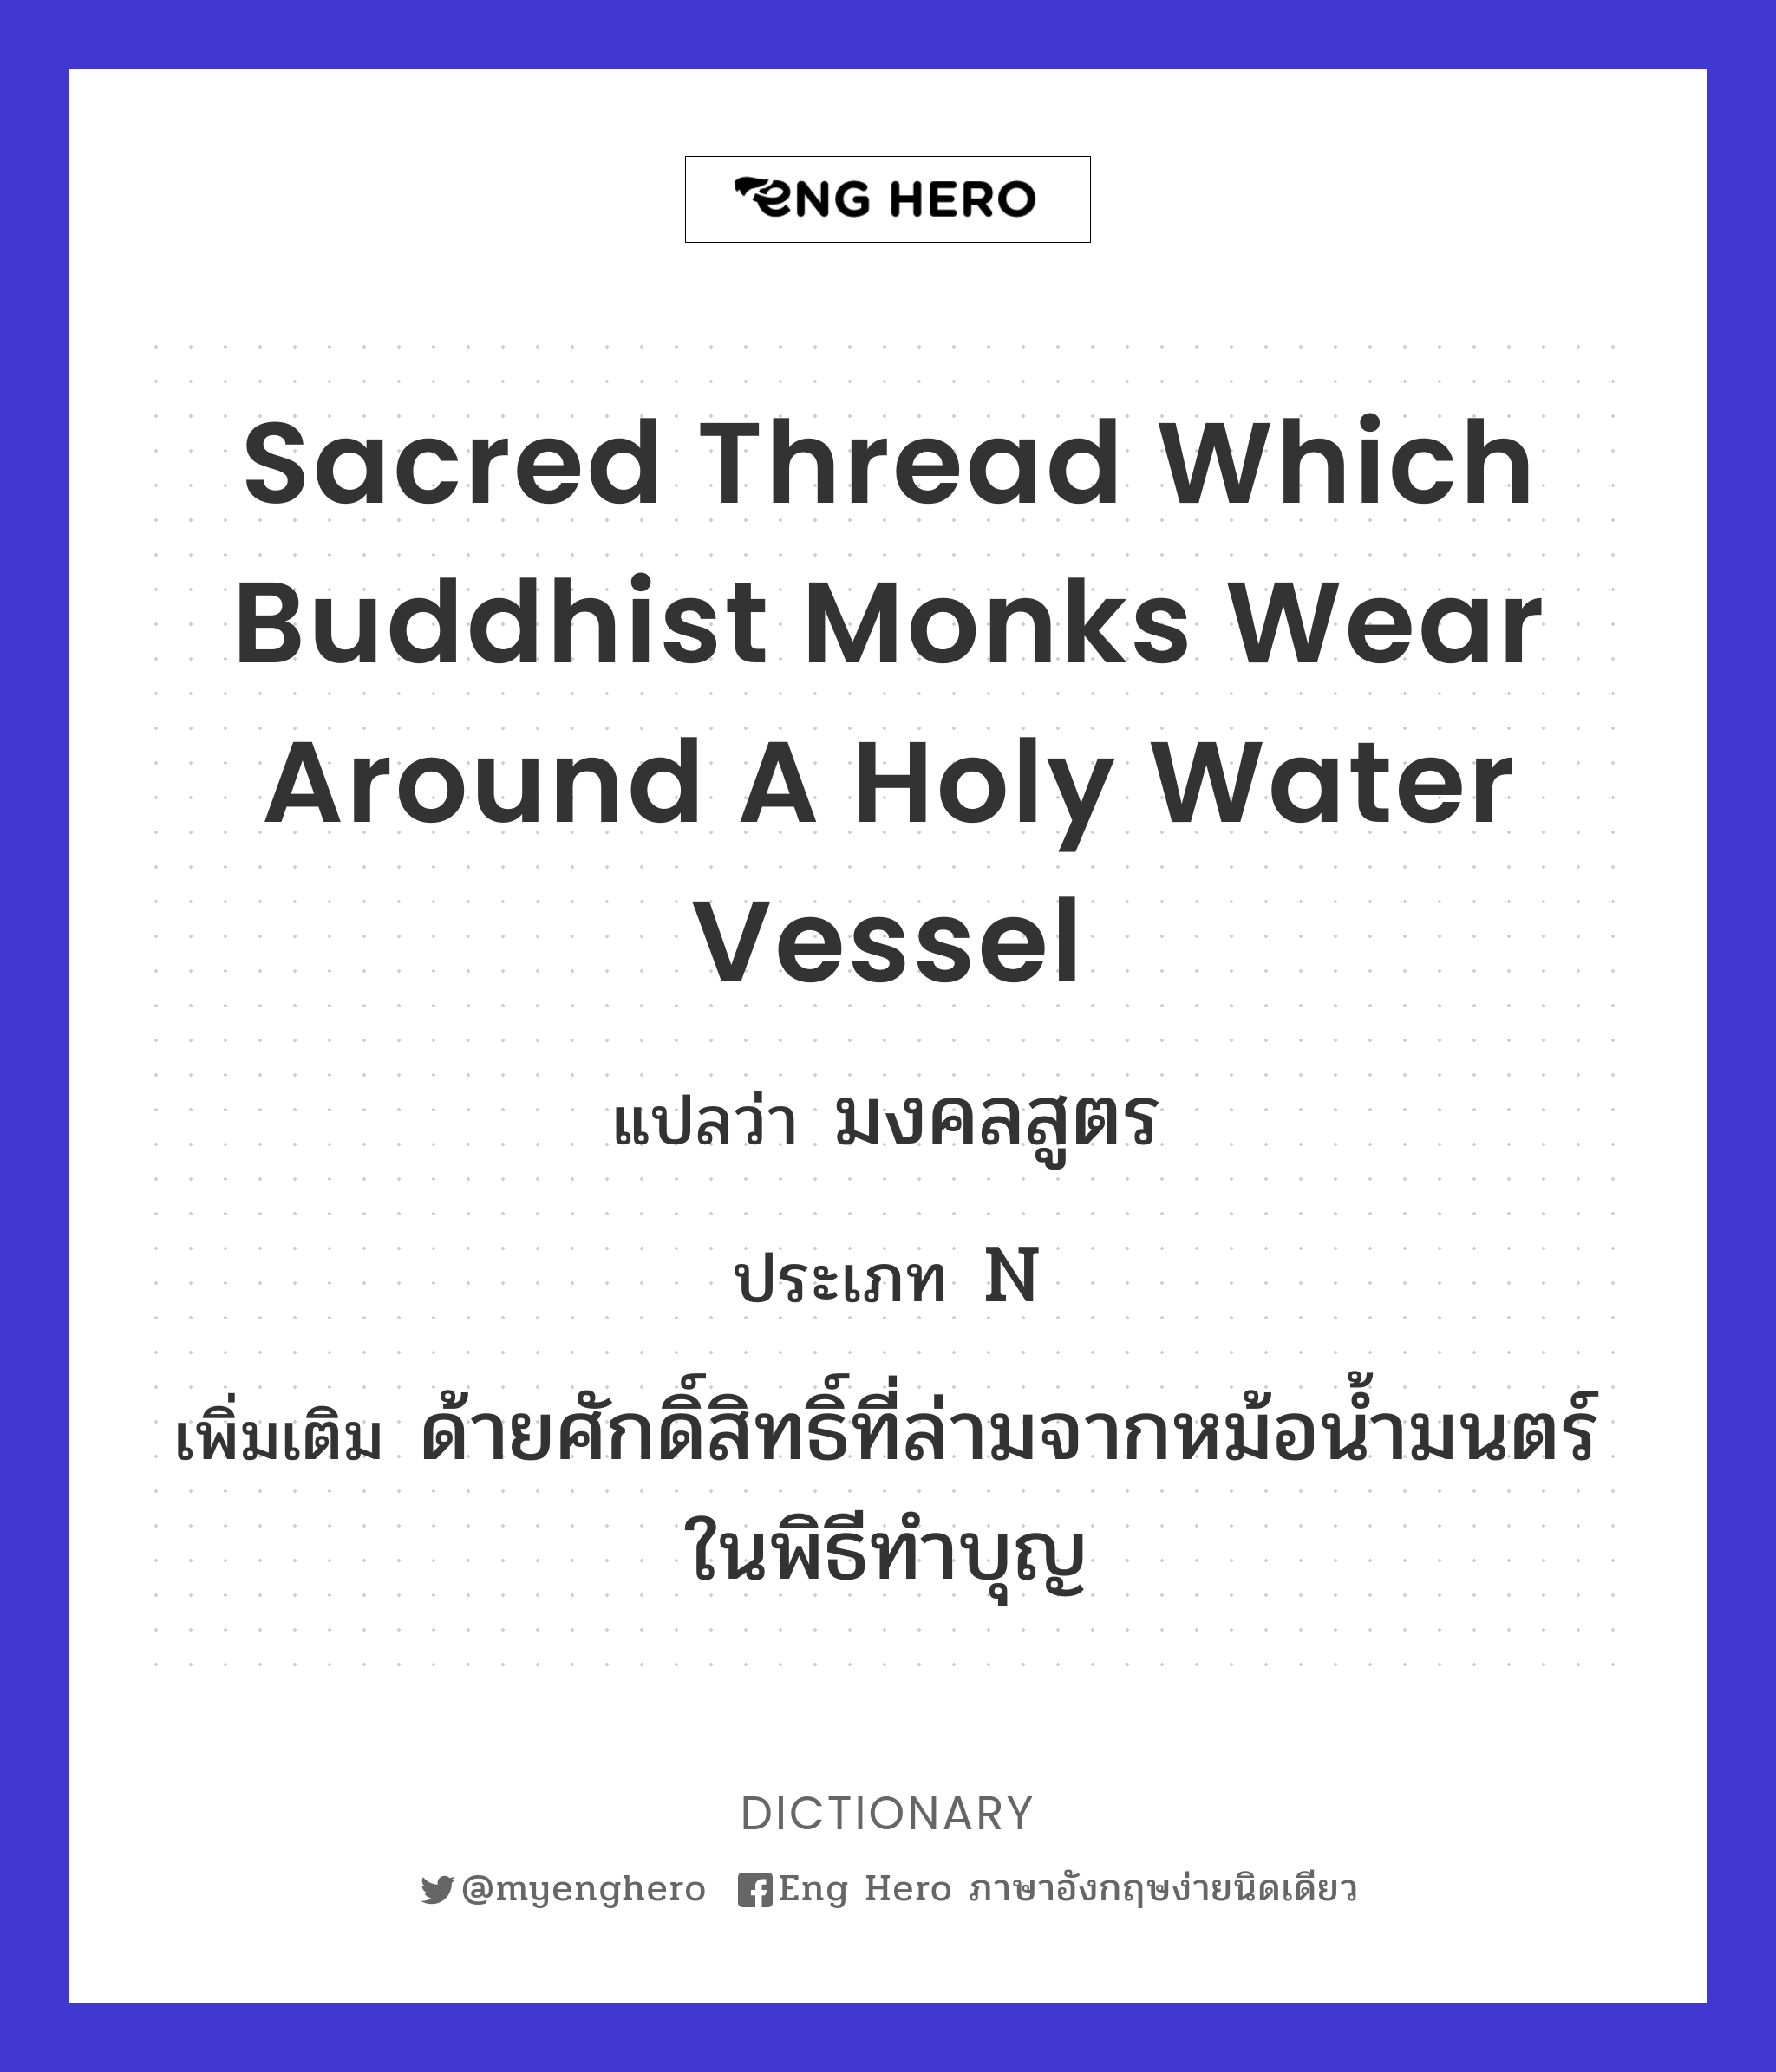 sacred thread which Buddhist monks wear around a holy water vessel